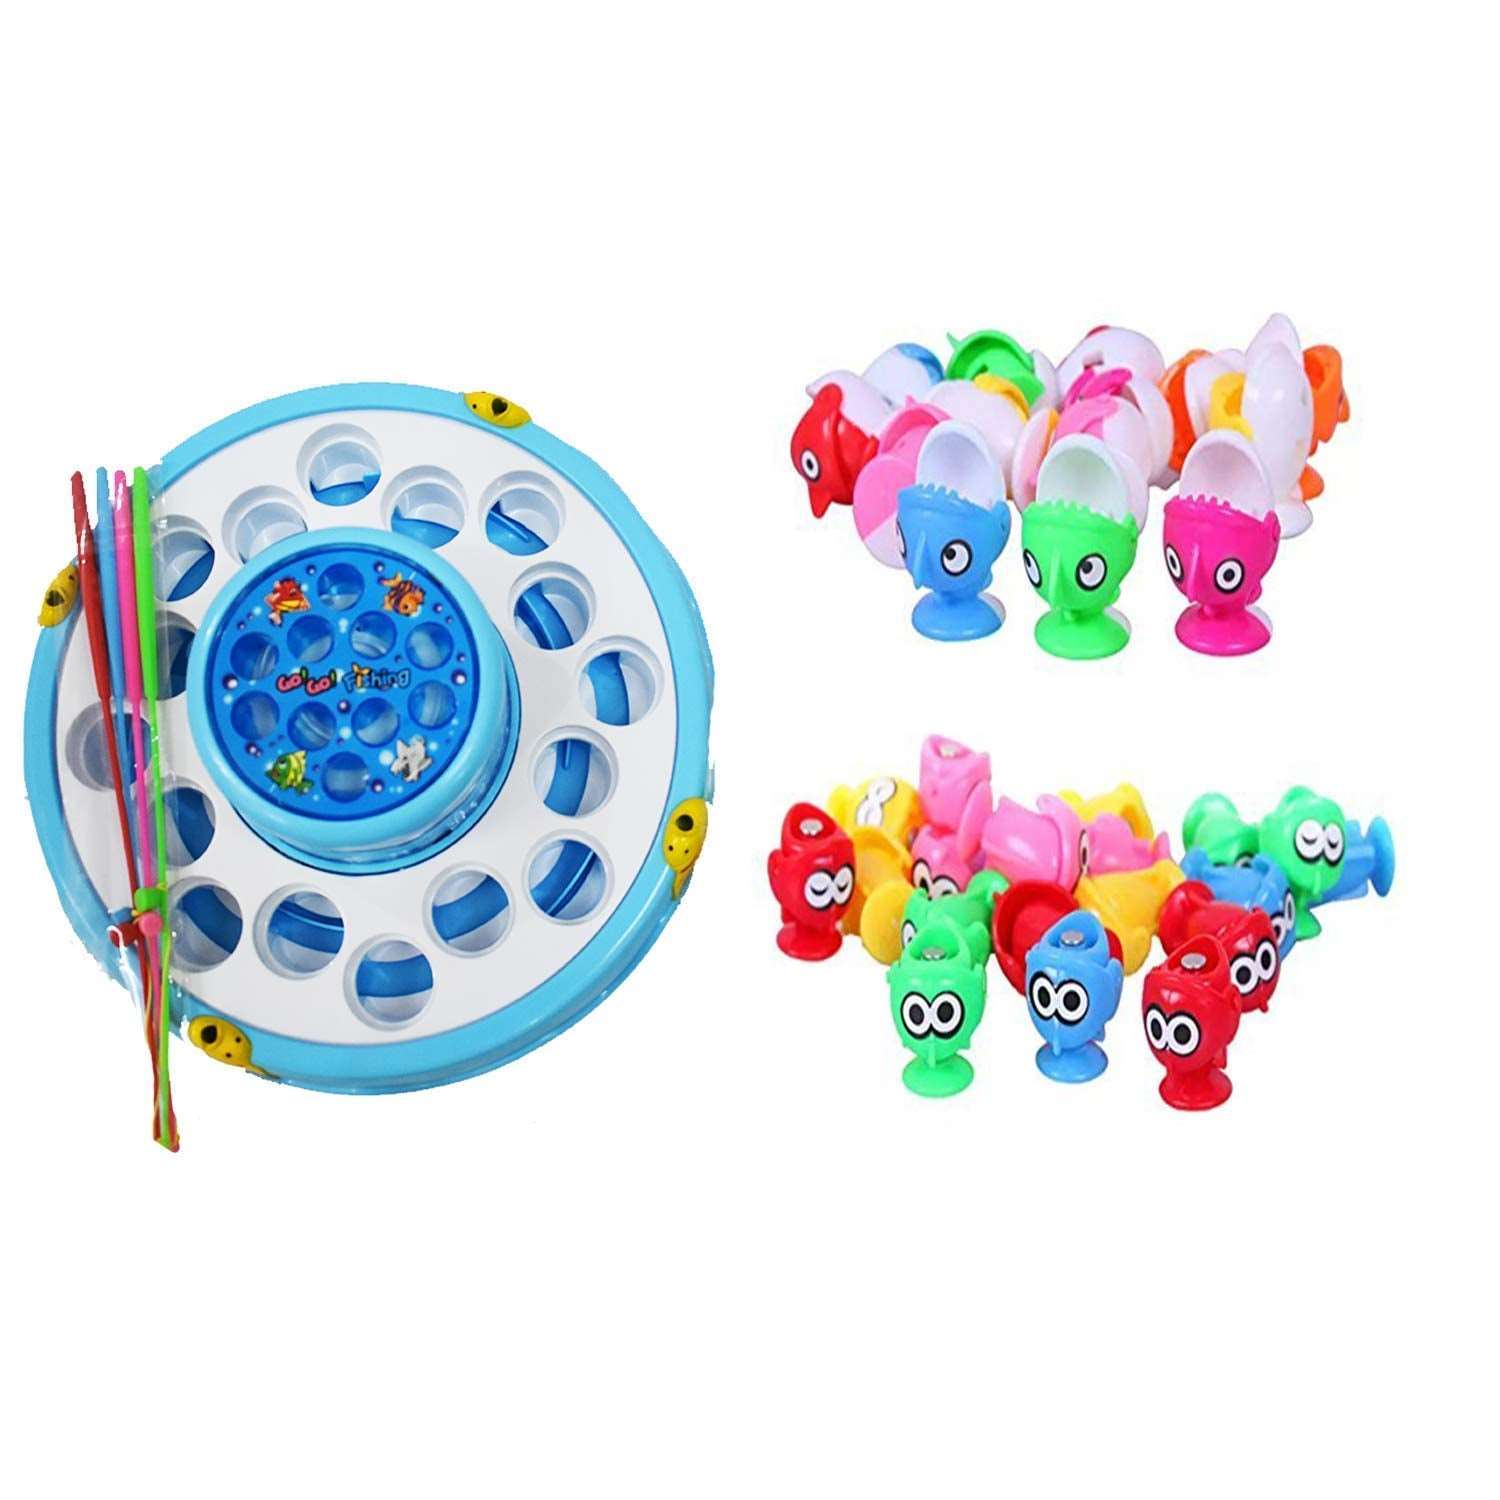 AZi Fish Catching Game Big with 26 Fishes and 4 Pods, Includes Music and Lights (Mix Color)